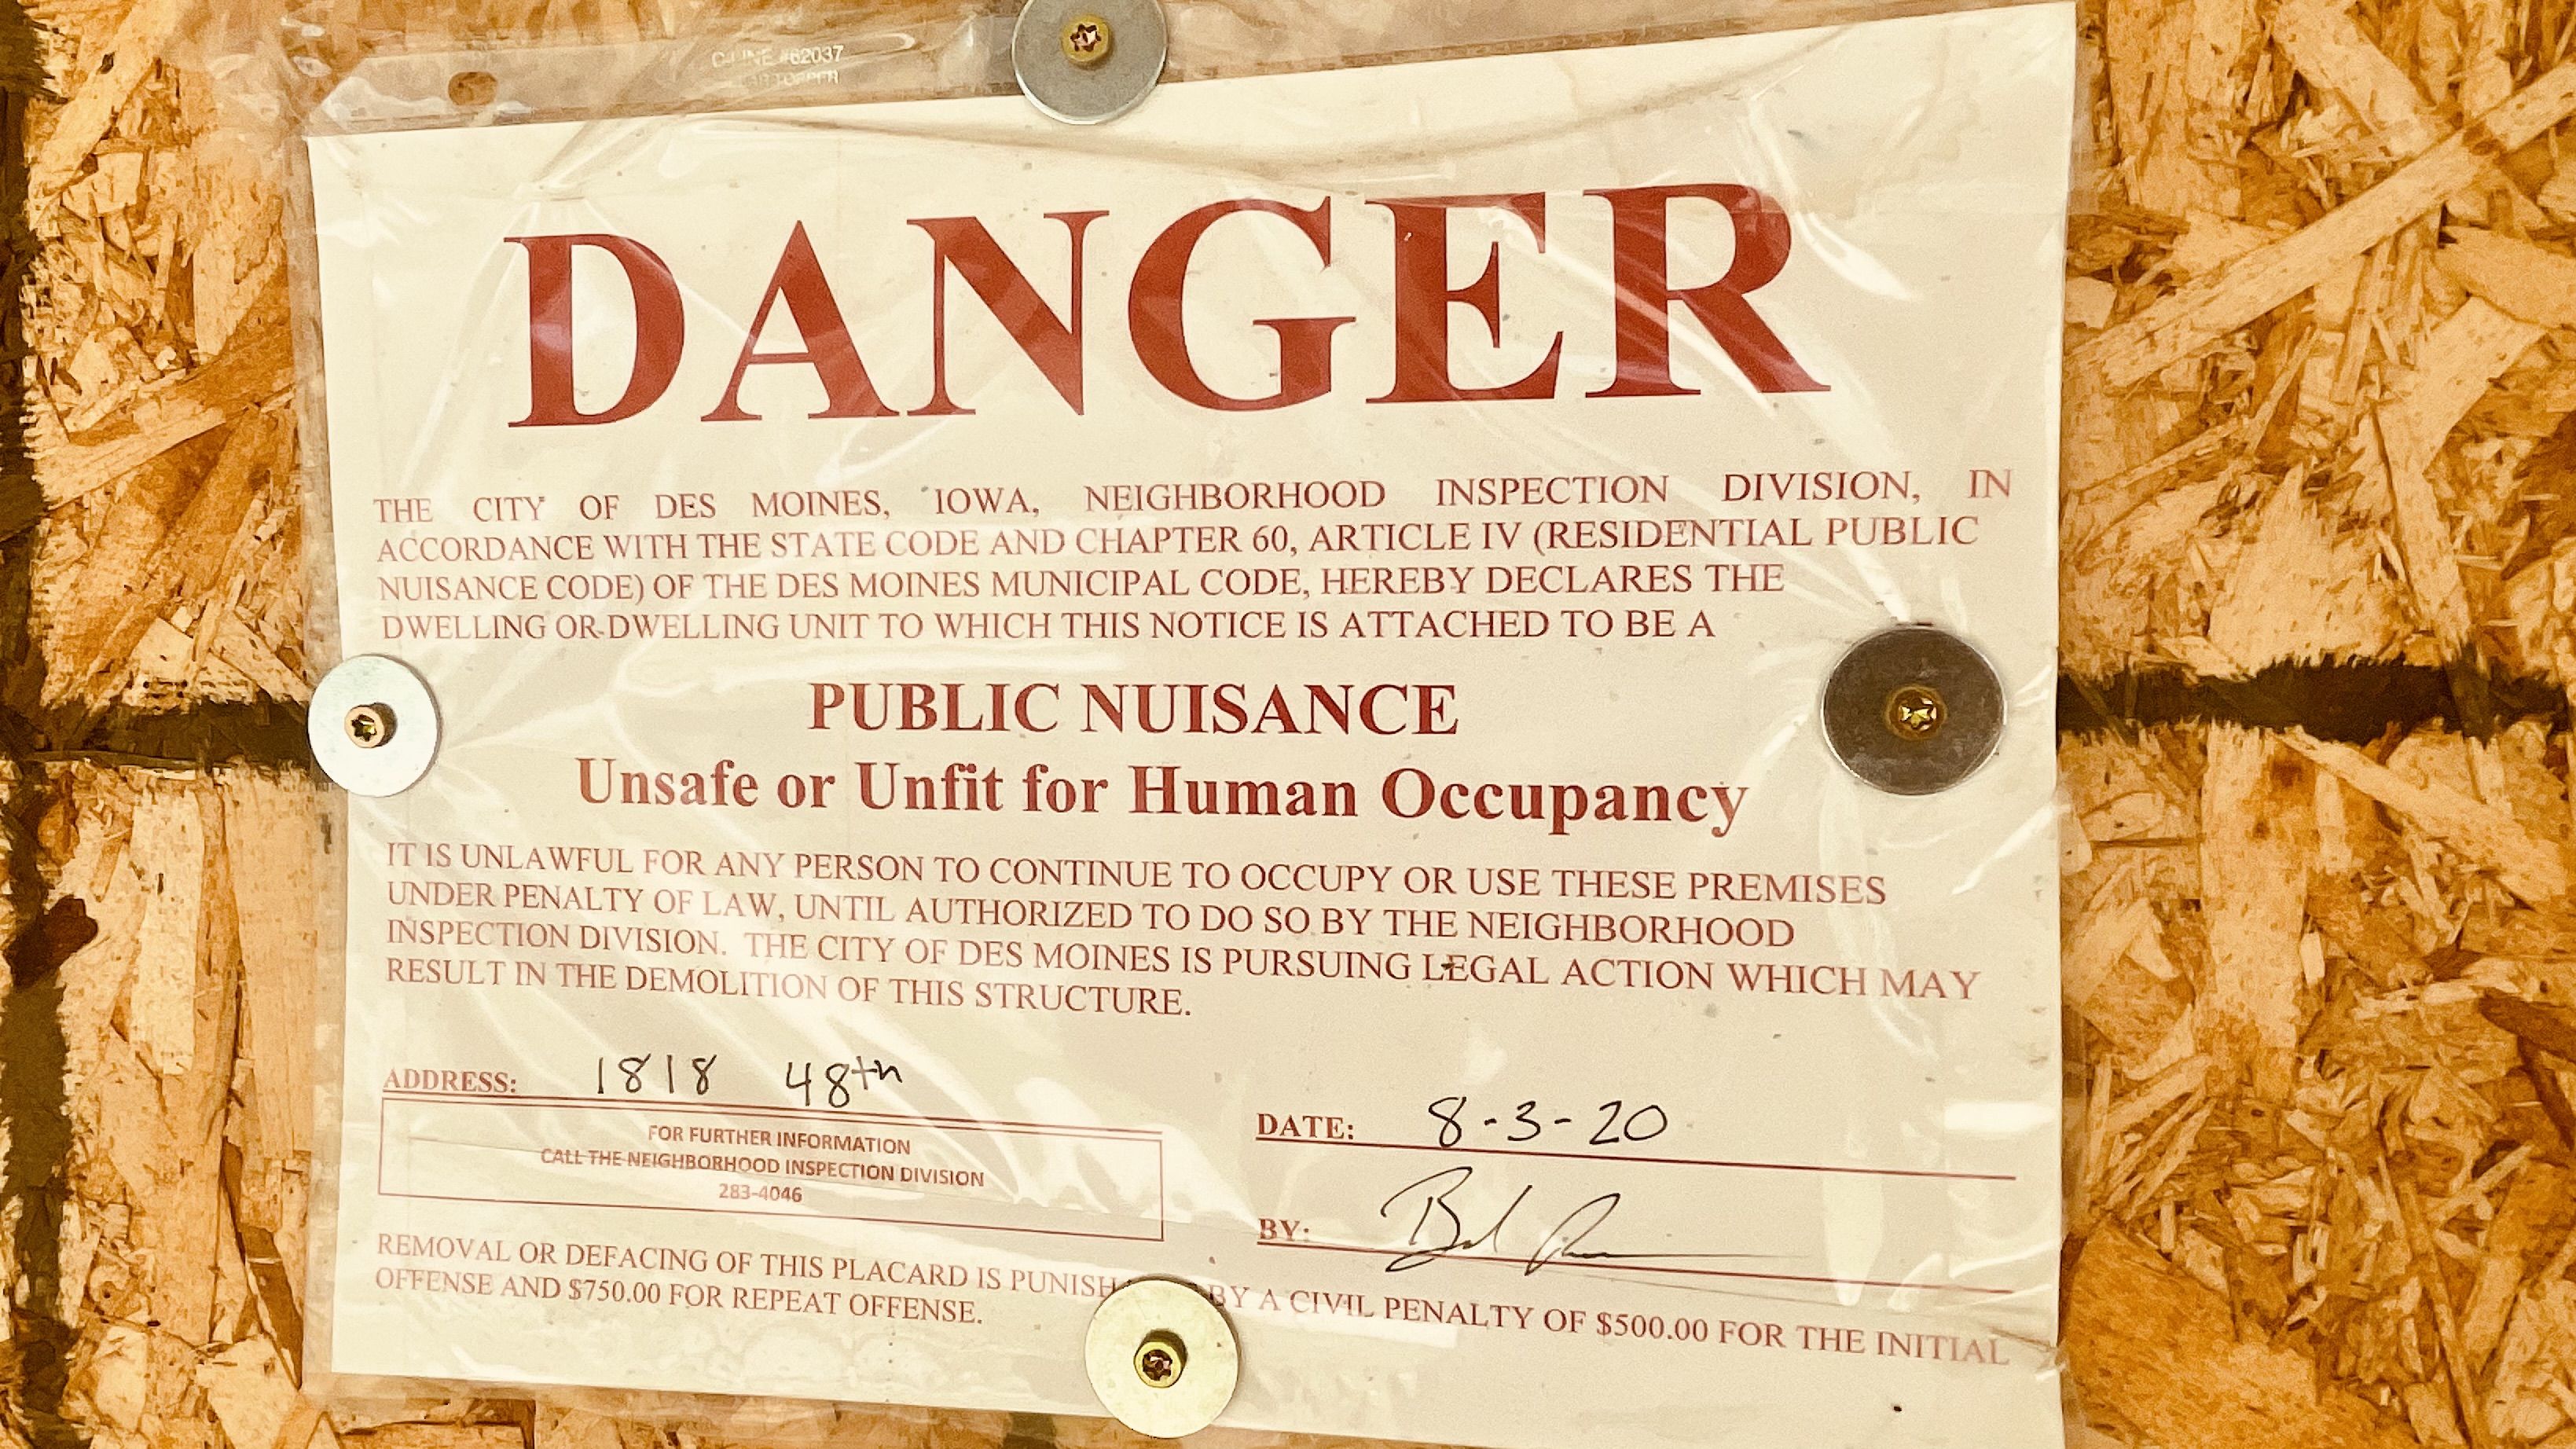 A photo of a public nuisance notice.